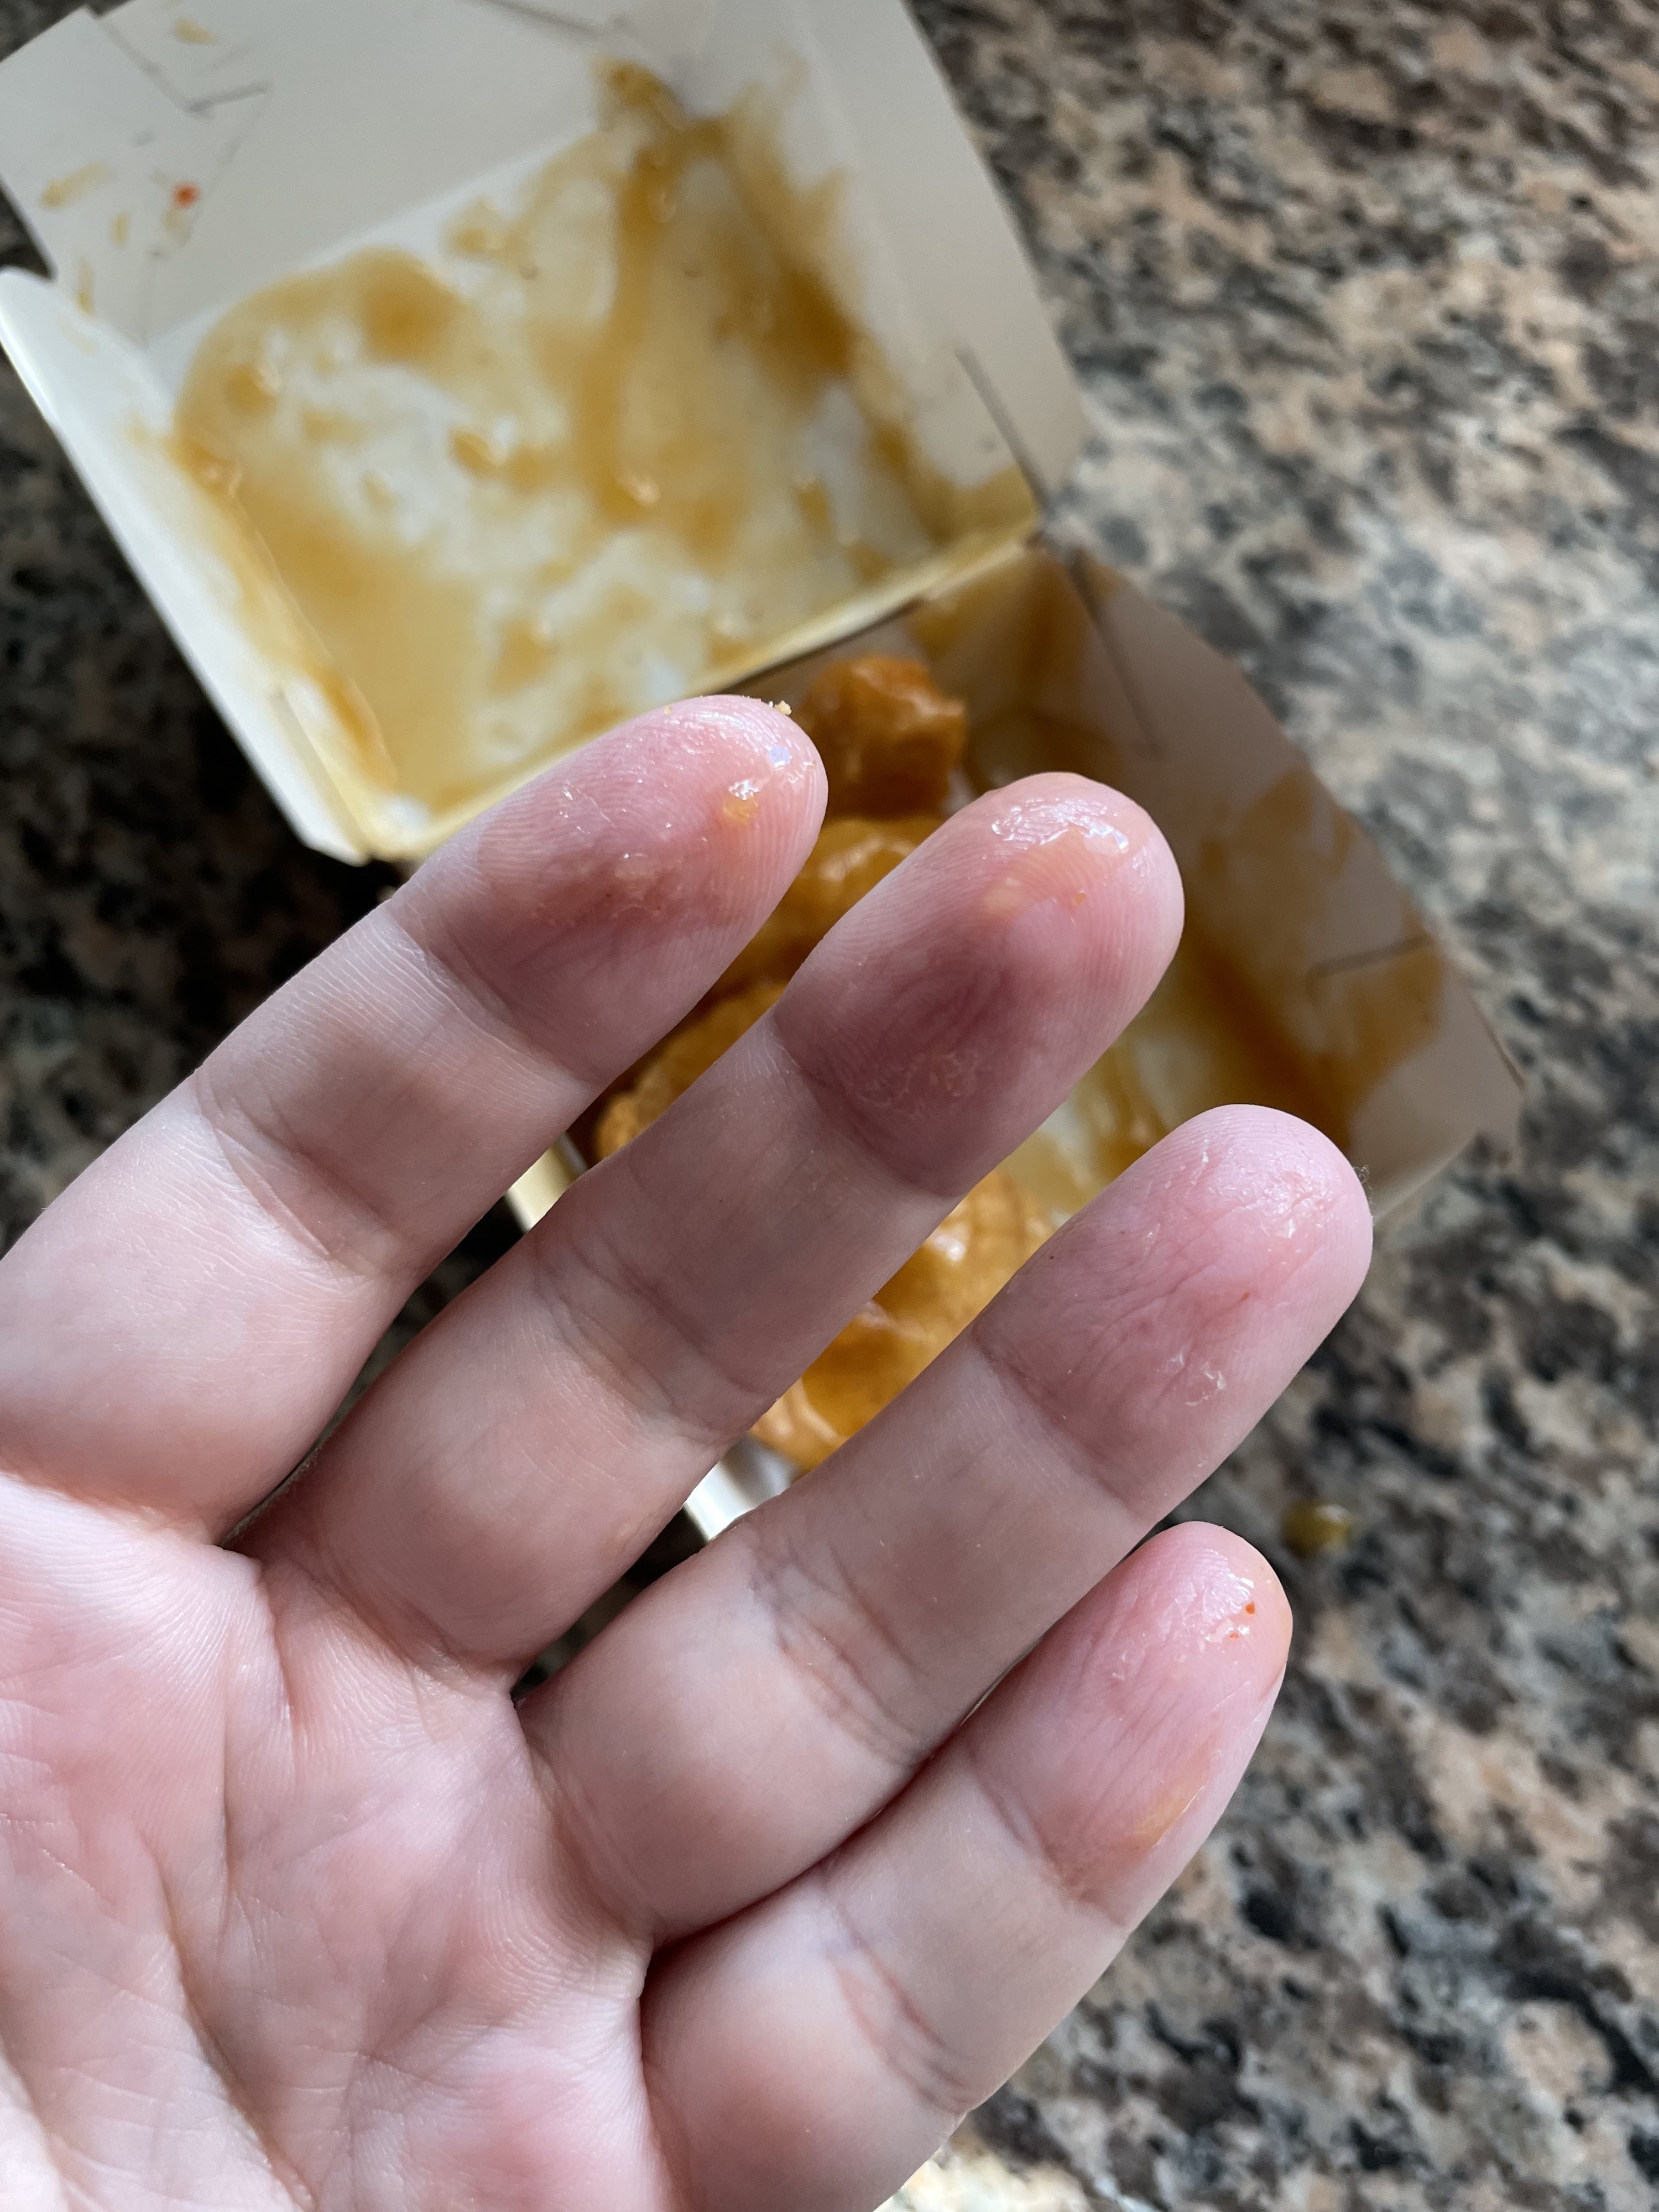 Close-up of fingers with some sauce on them